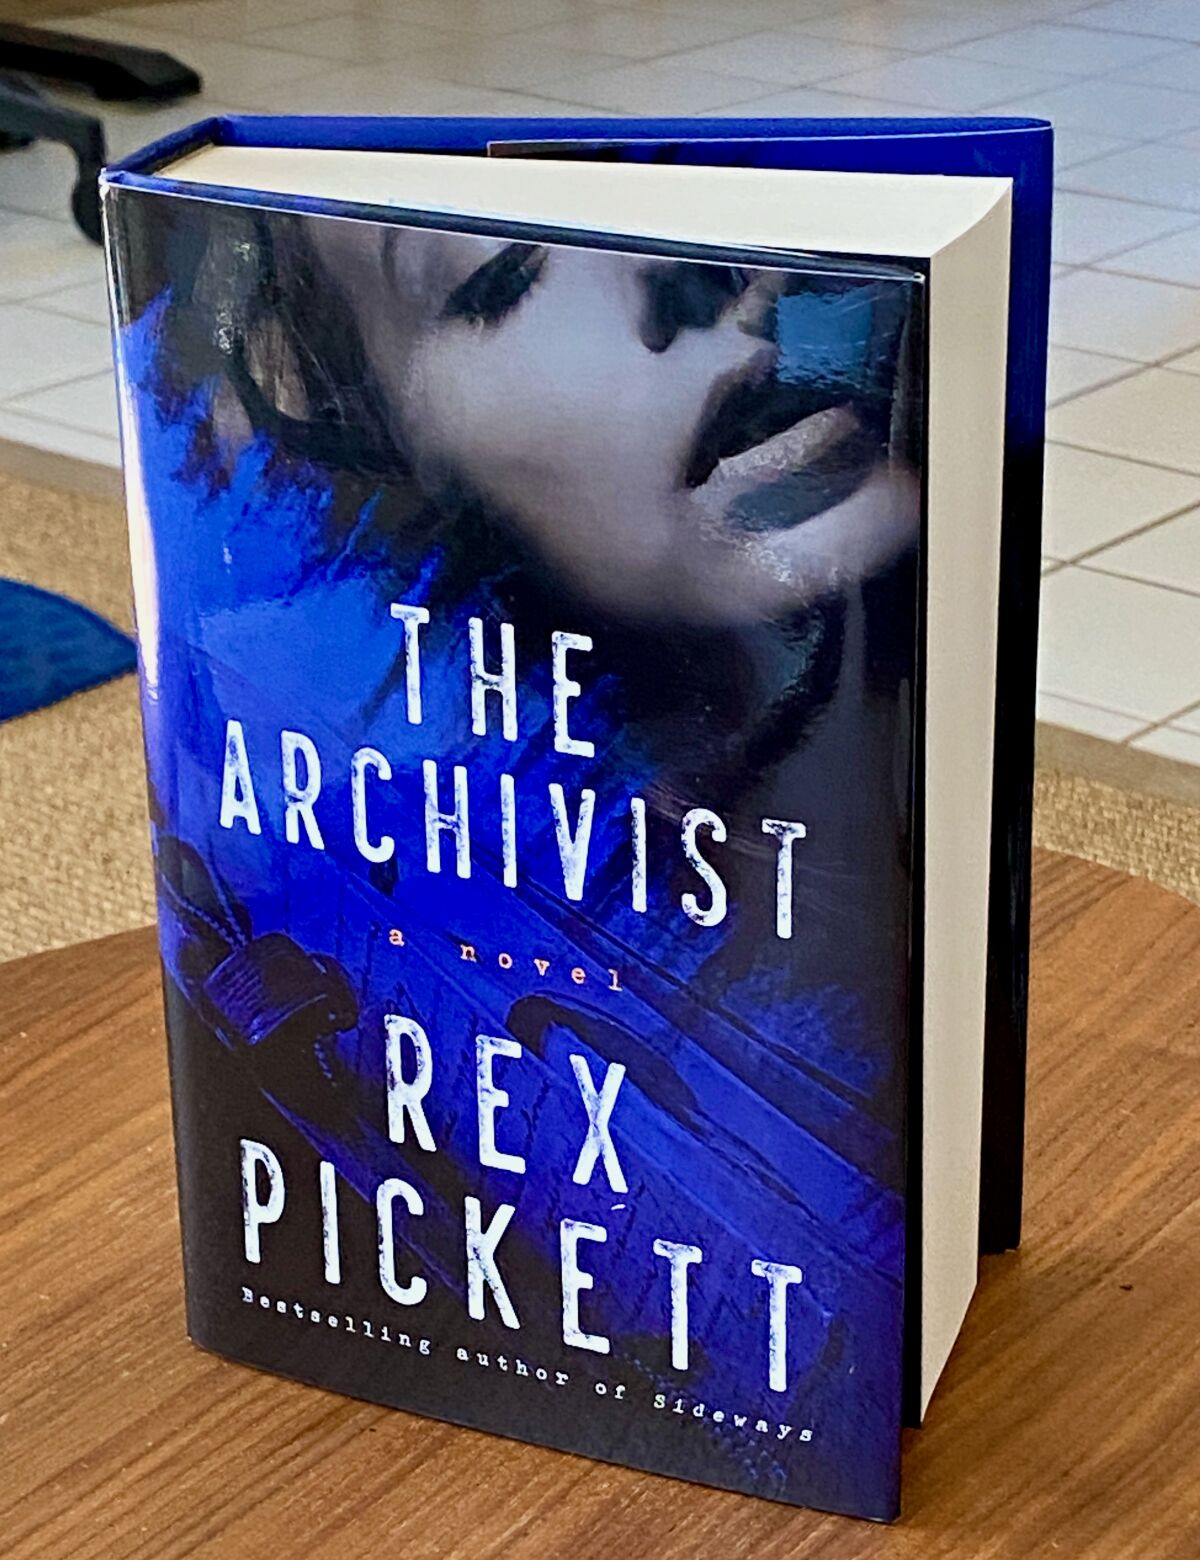 Rex Pickett's "The Archivist" is 700 pages.